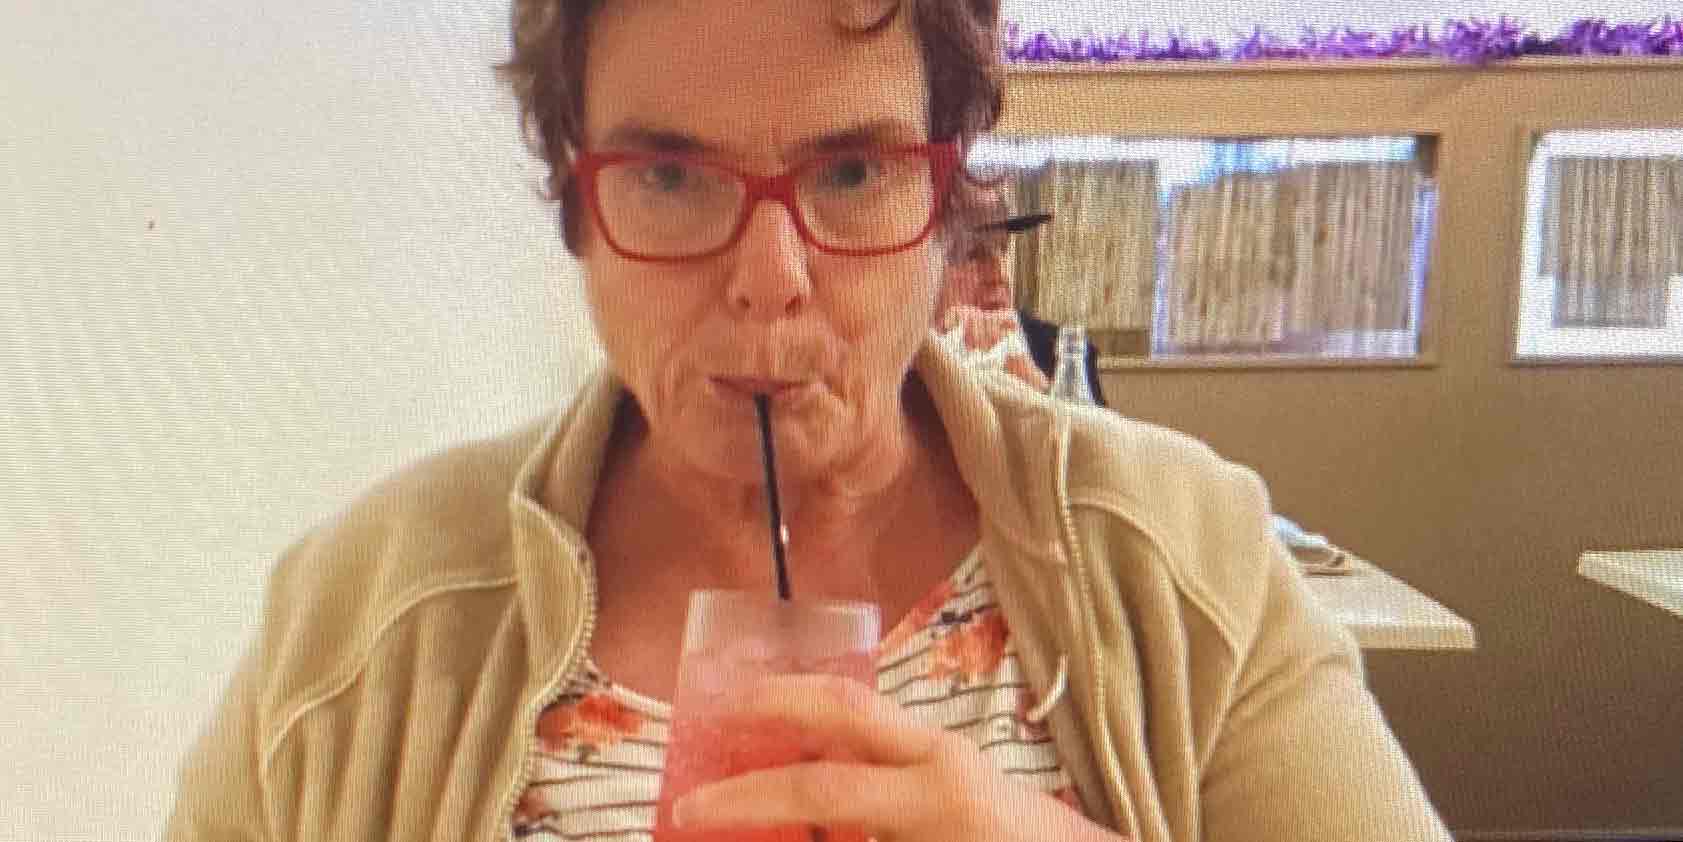 A woman drinking a drink out of a straw.